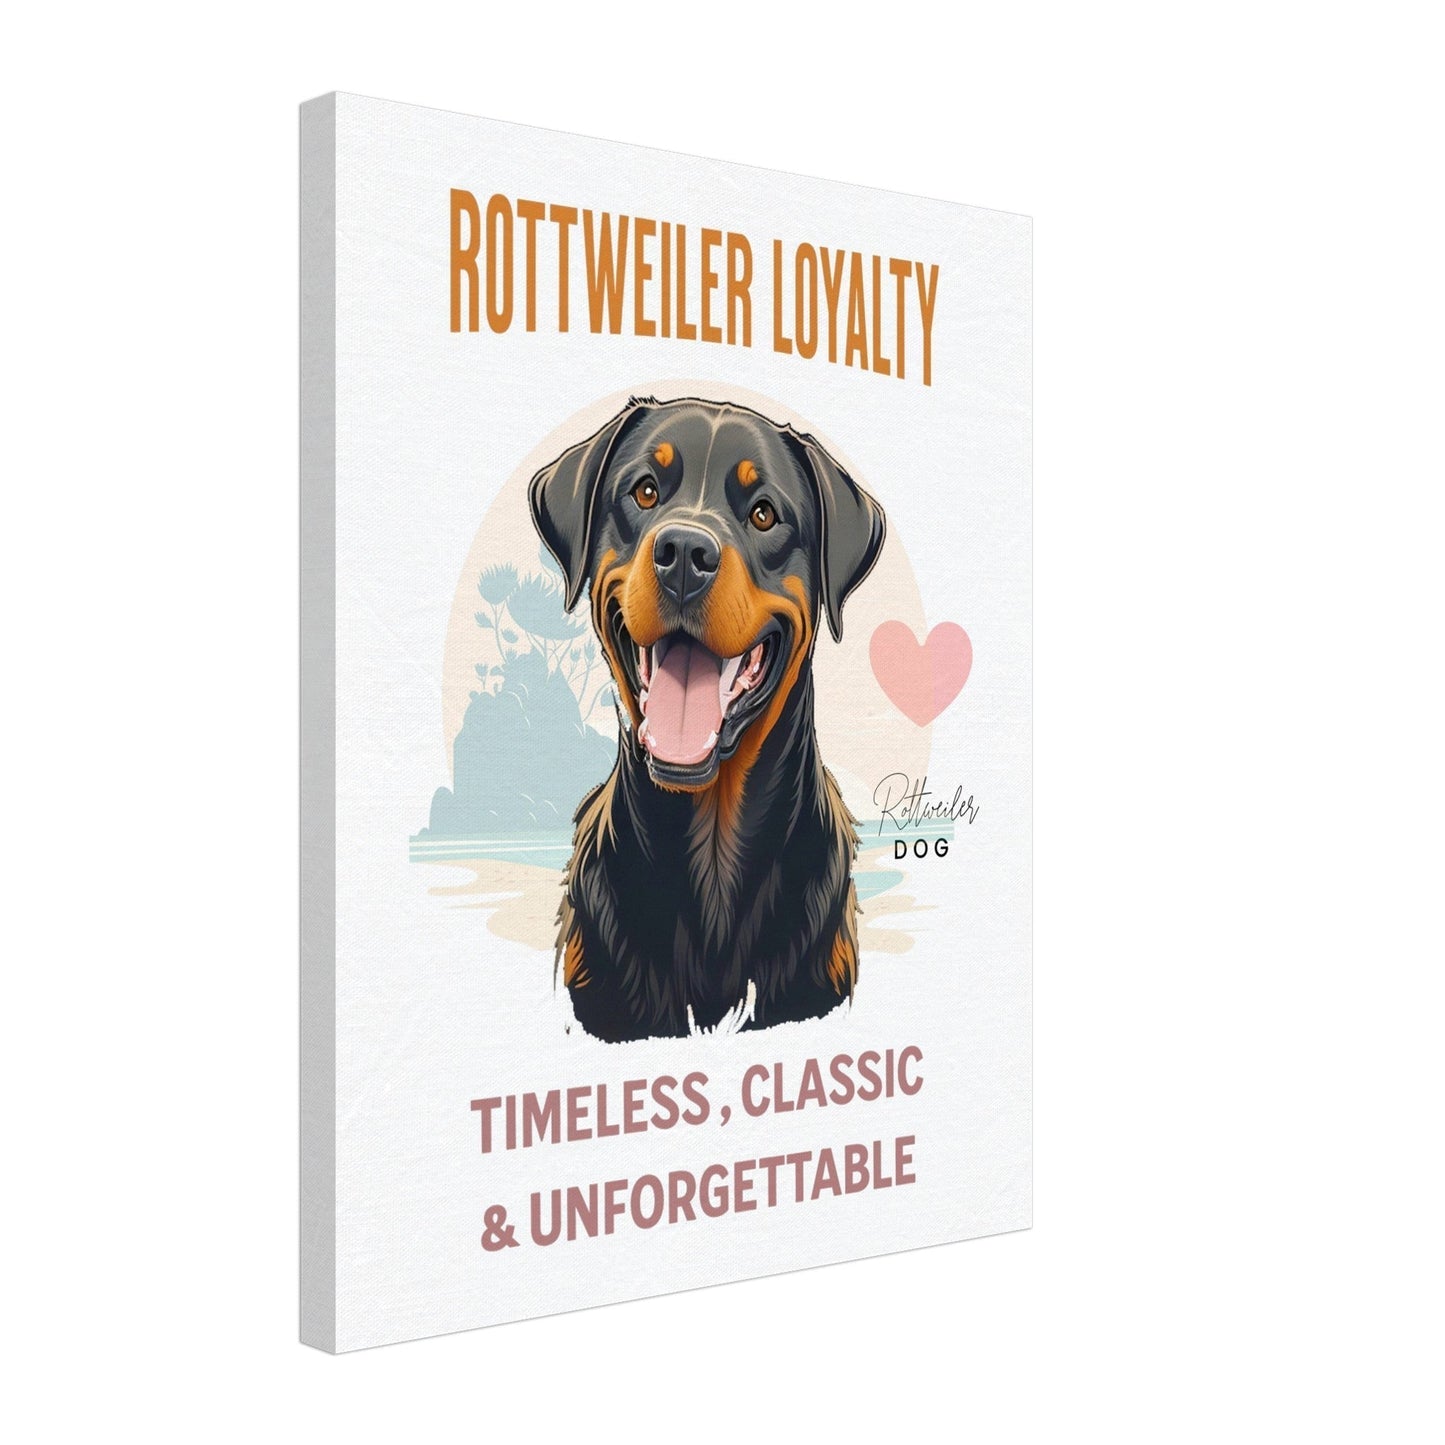 Rottweiler Canvas Print59.99-(FREE Delivery) Shop now at itsaboutmydog.com, american rottweiler, dog canvas, rottweiler, rottweiler art, rottweiler dog, Rottweiler Dog Sign, rottweiler for sale, rottweiler loss gift, Rottweiler Mother, Rottweiler Poster, Rottweiler Present, Rottweiler print, Rottweiler Printable, Rottweiler sign